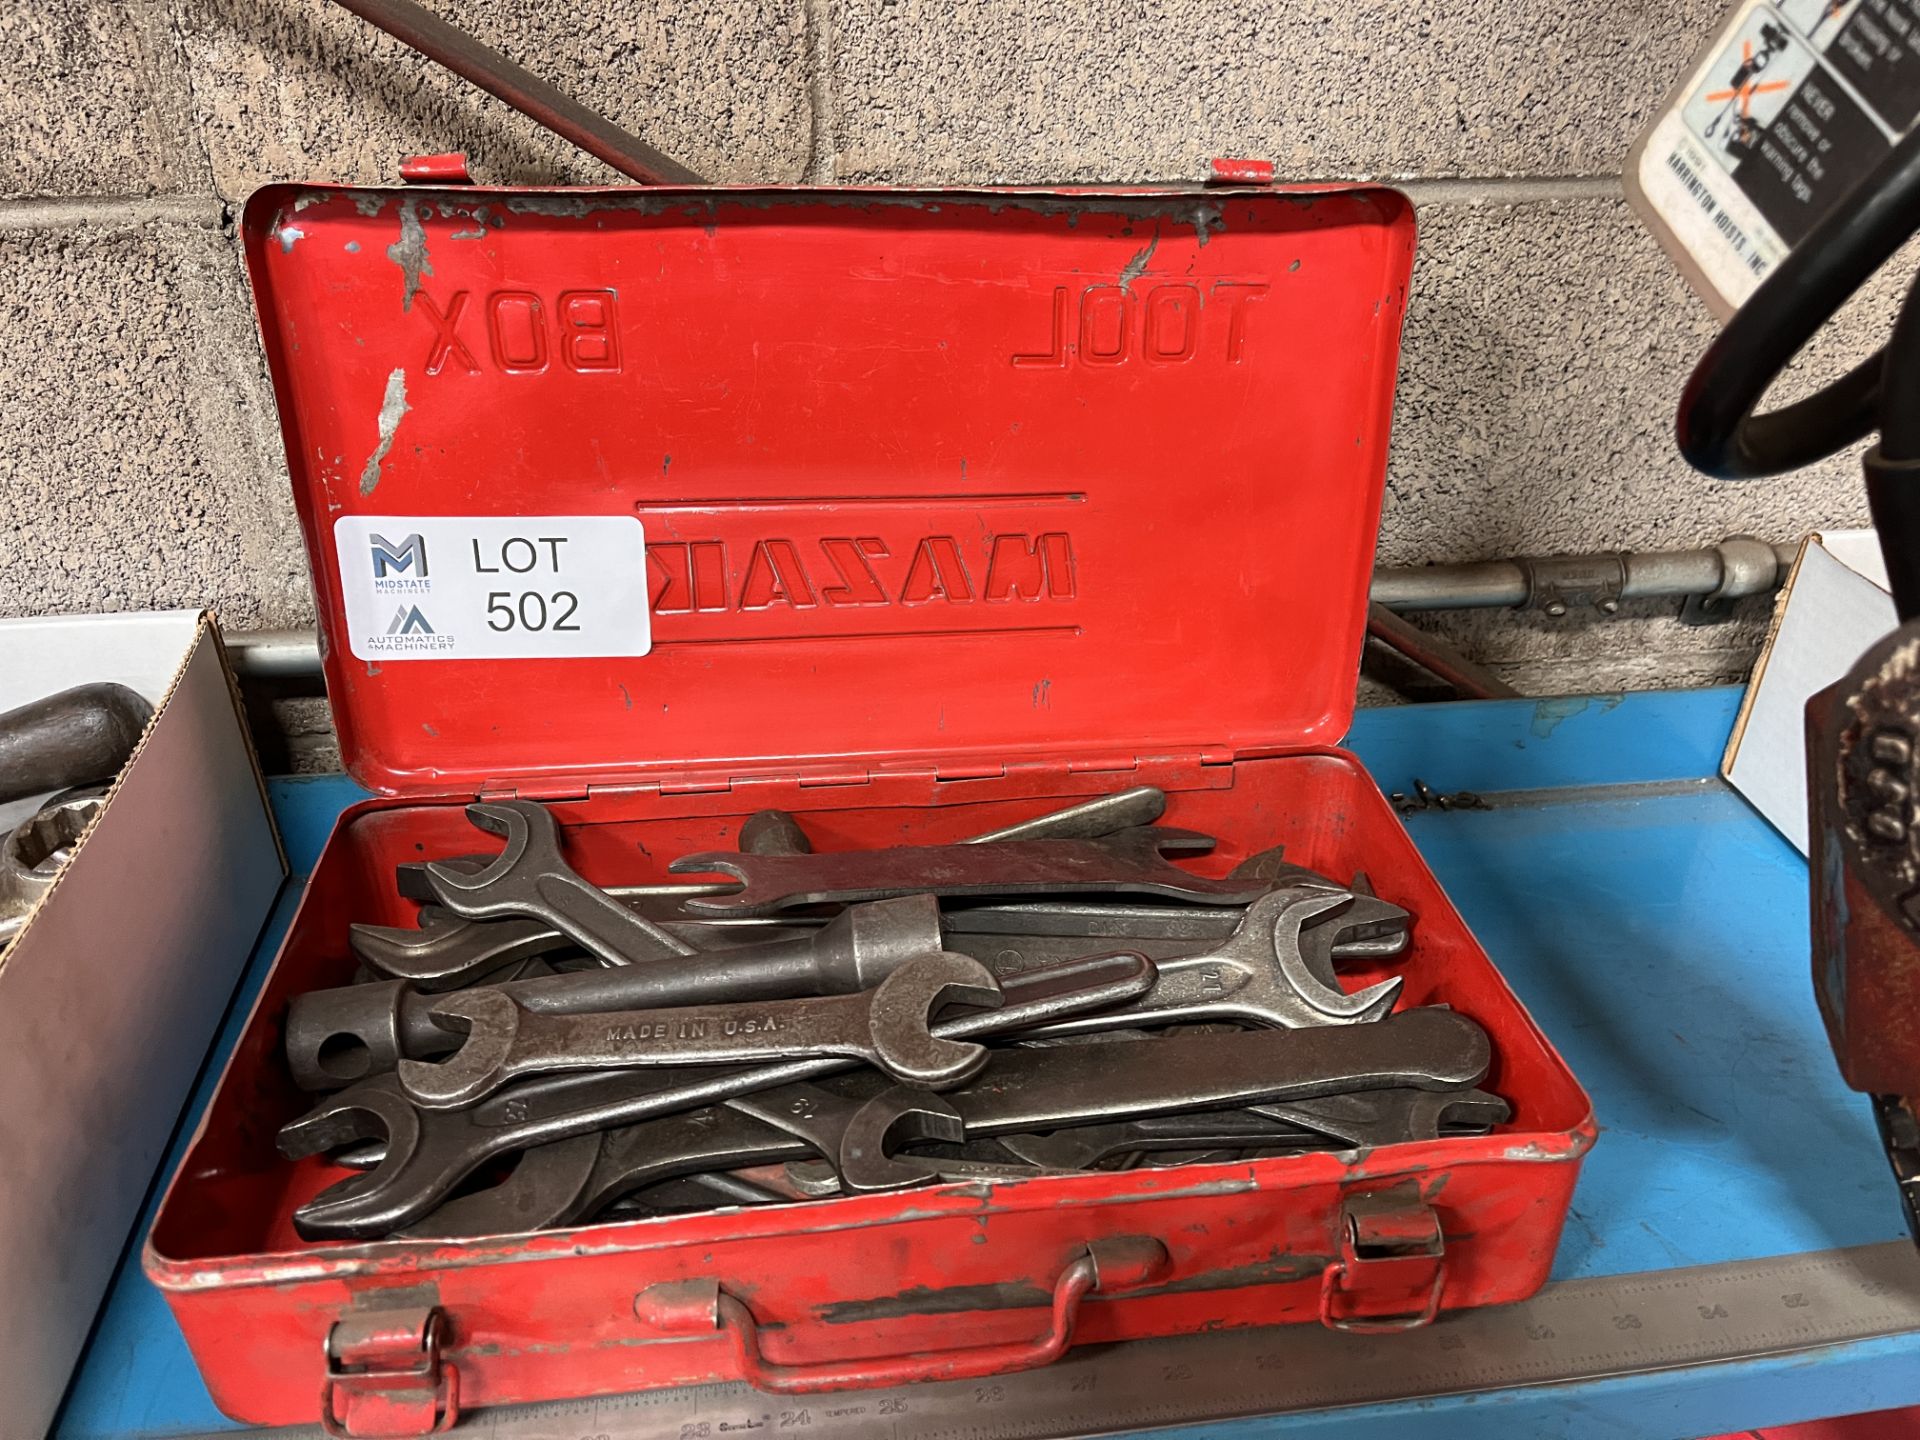 Misc Wrenches and Tools